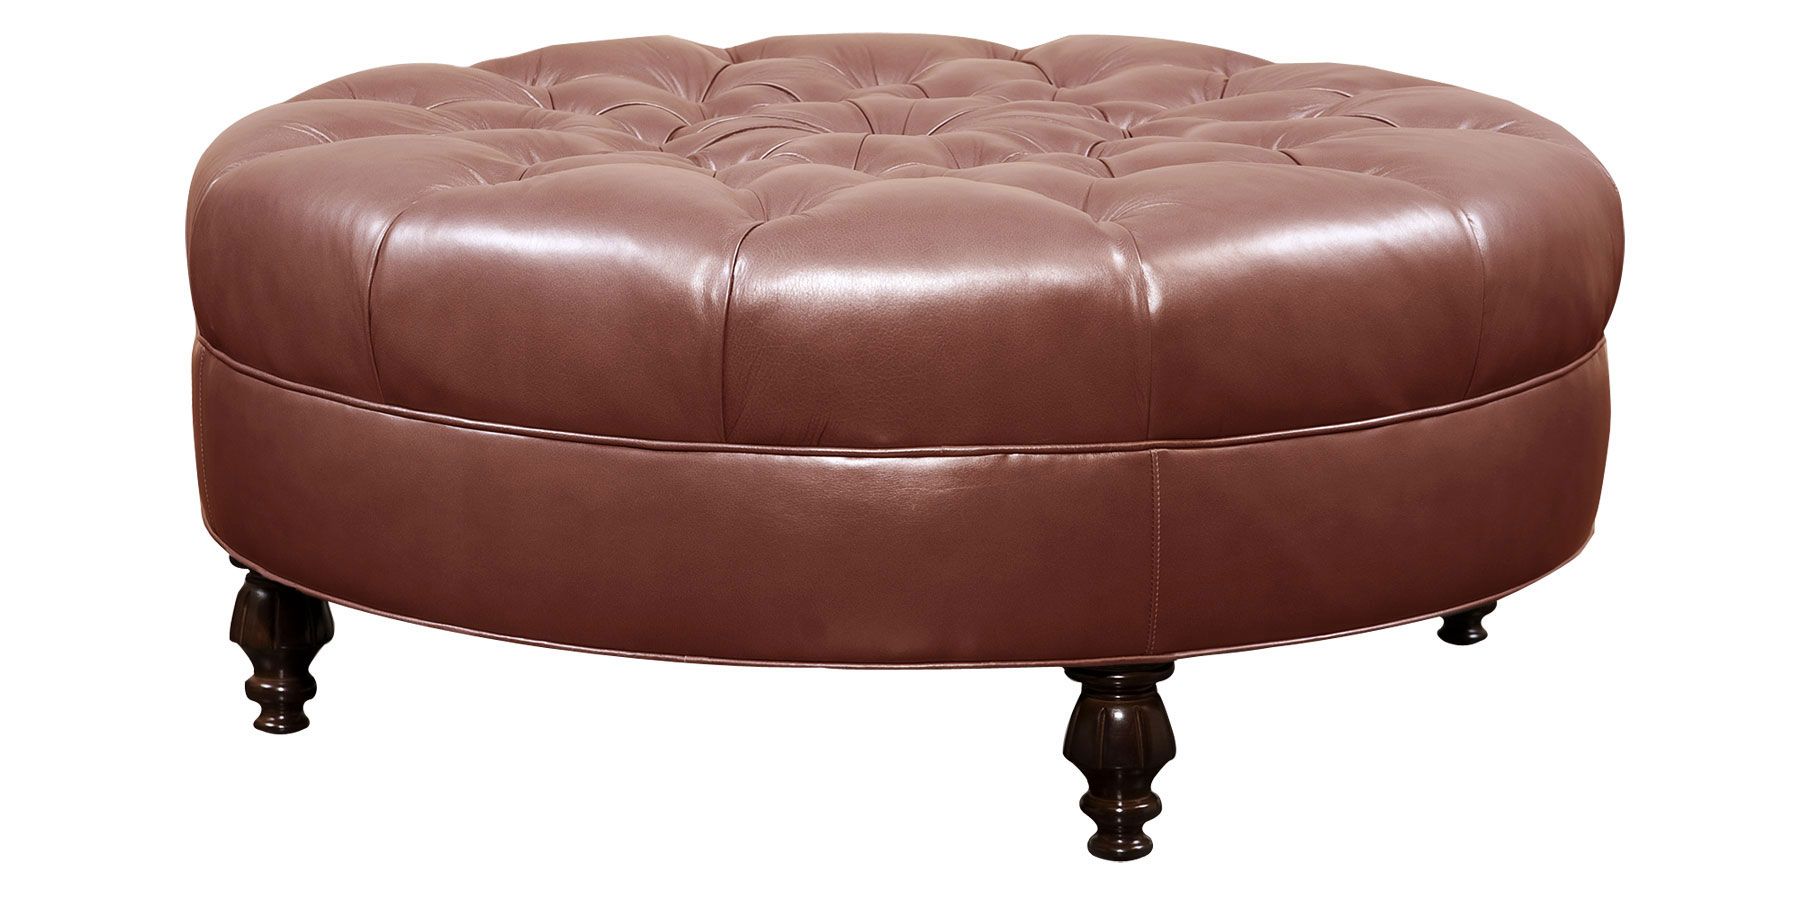 Leather Ottomans And Coffee Table Storage Large Round Leather Ottoman Coffee Table Coffee Leather Large Round Tufted Ottoman (View 8 of 10)